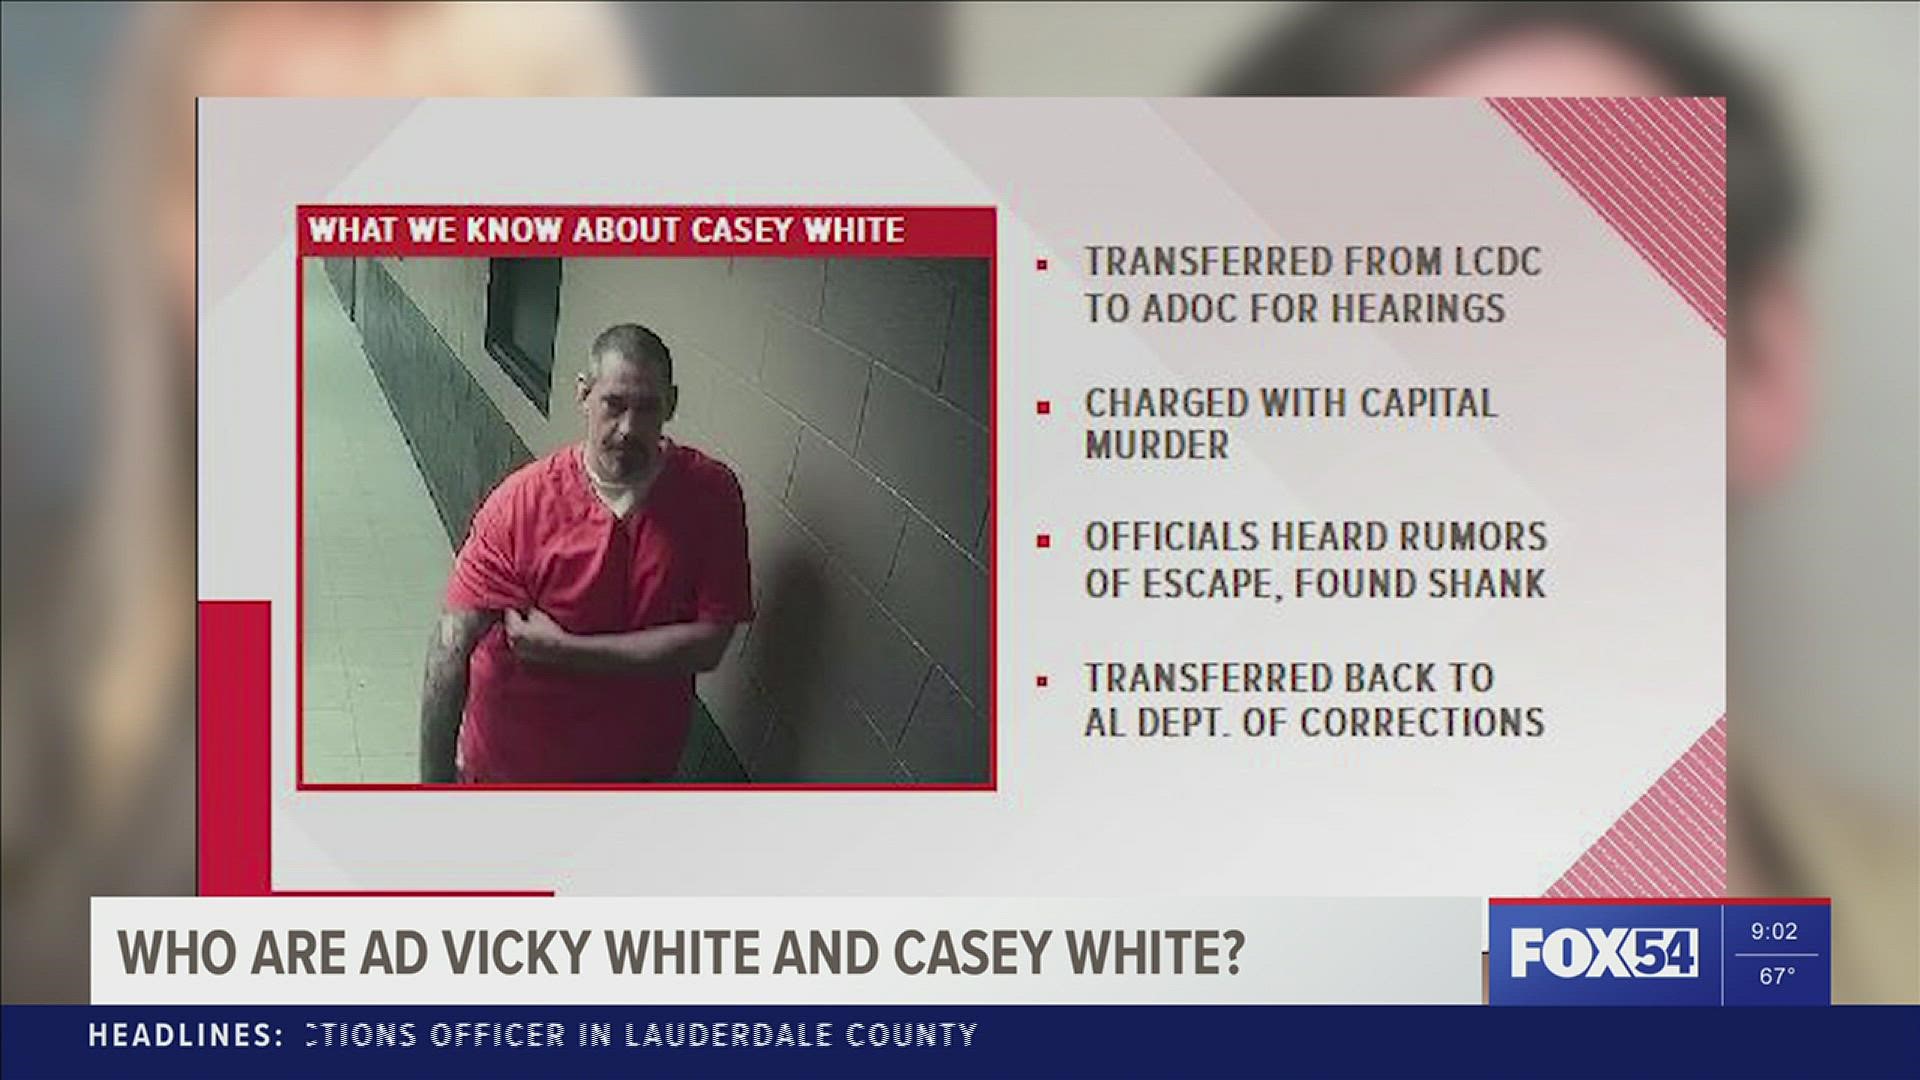 More details about who the escapee and missing in action Corrections officer, Vicky White are.